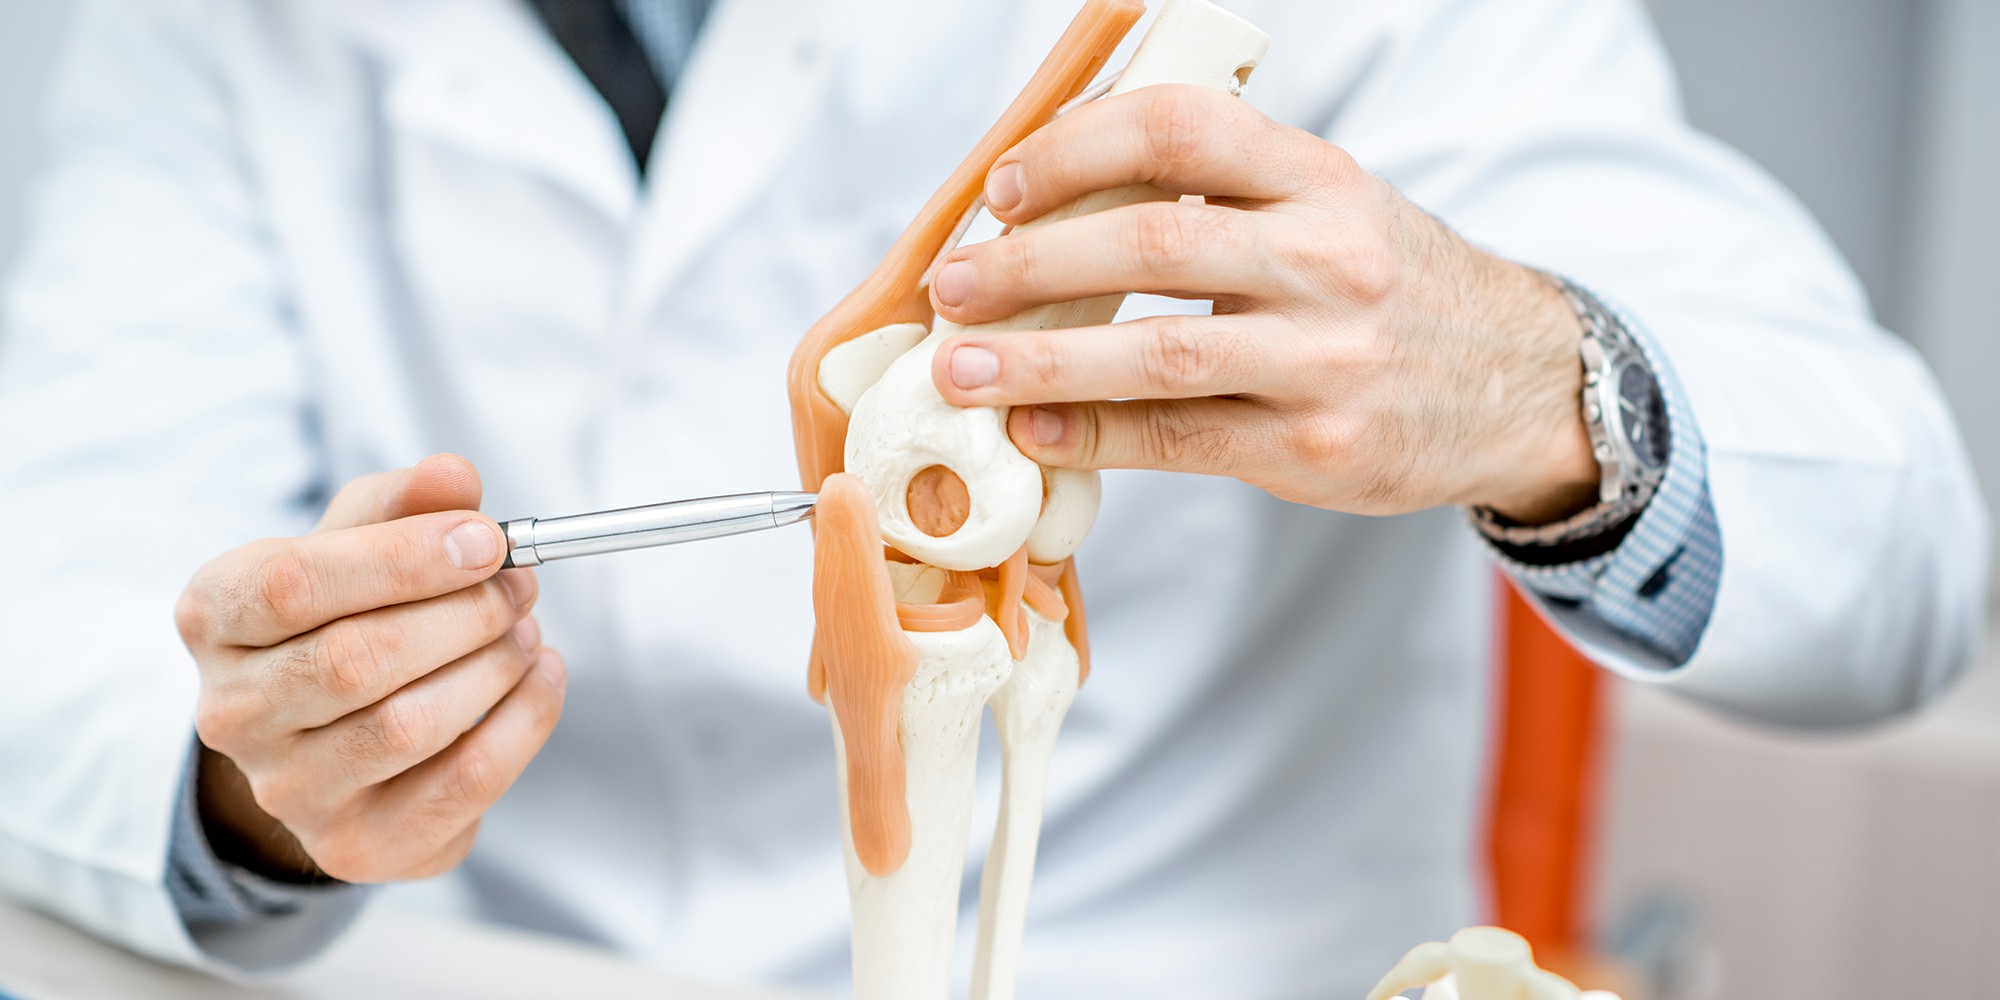 Best Hospital for Joint Replacement inTamil Nadu